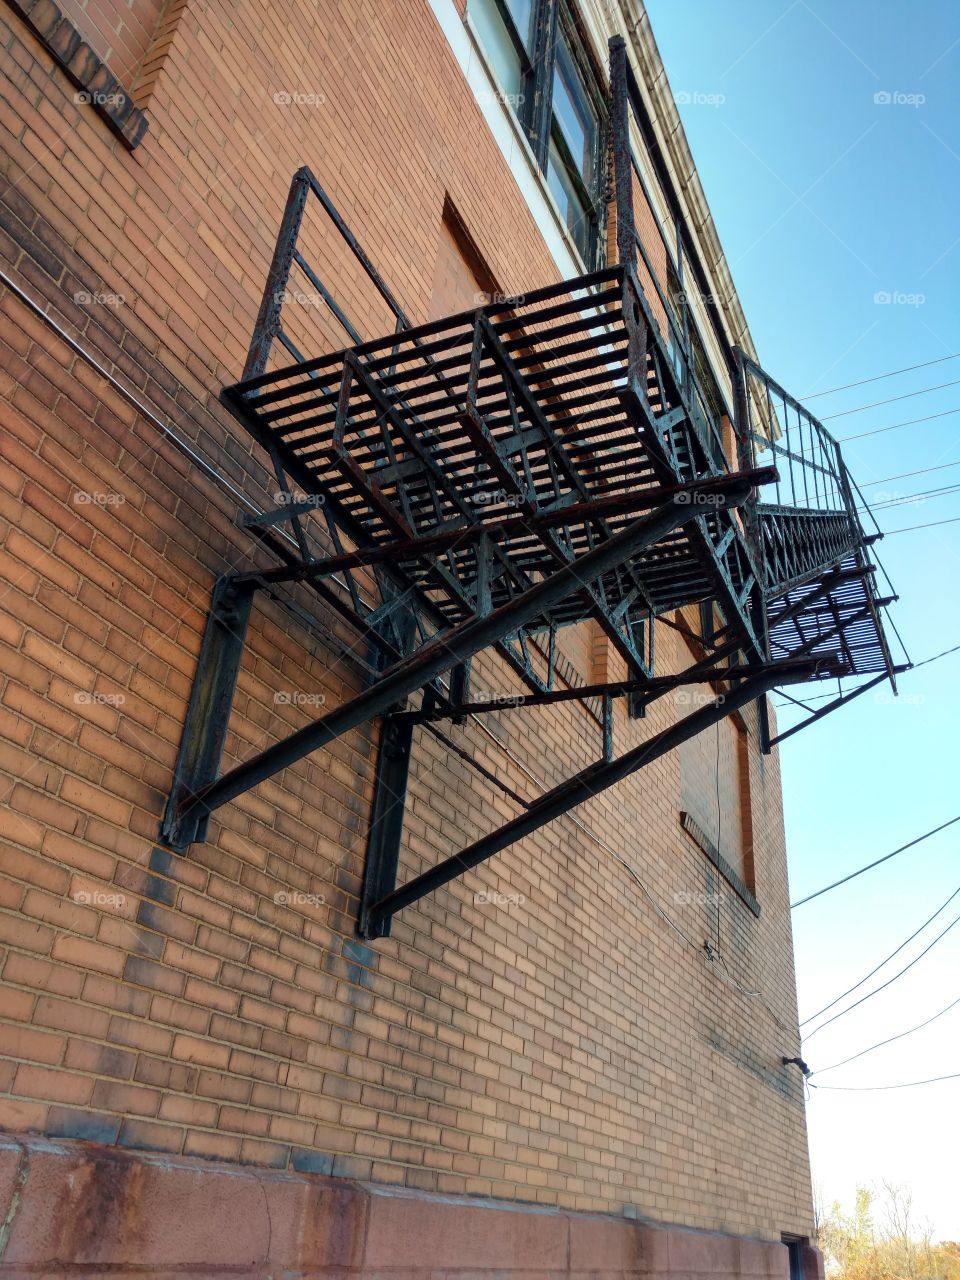 old rustic building Landing for fire escape